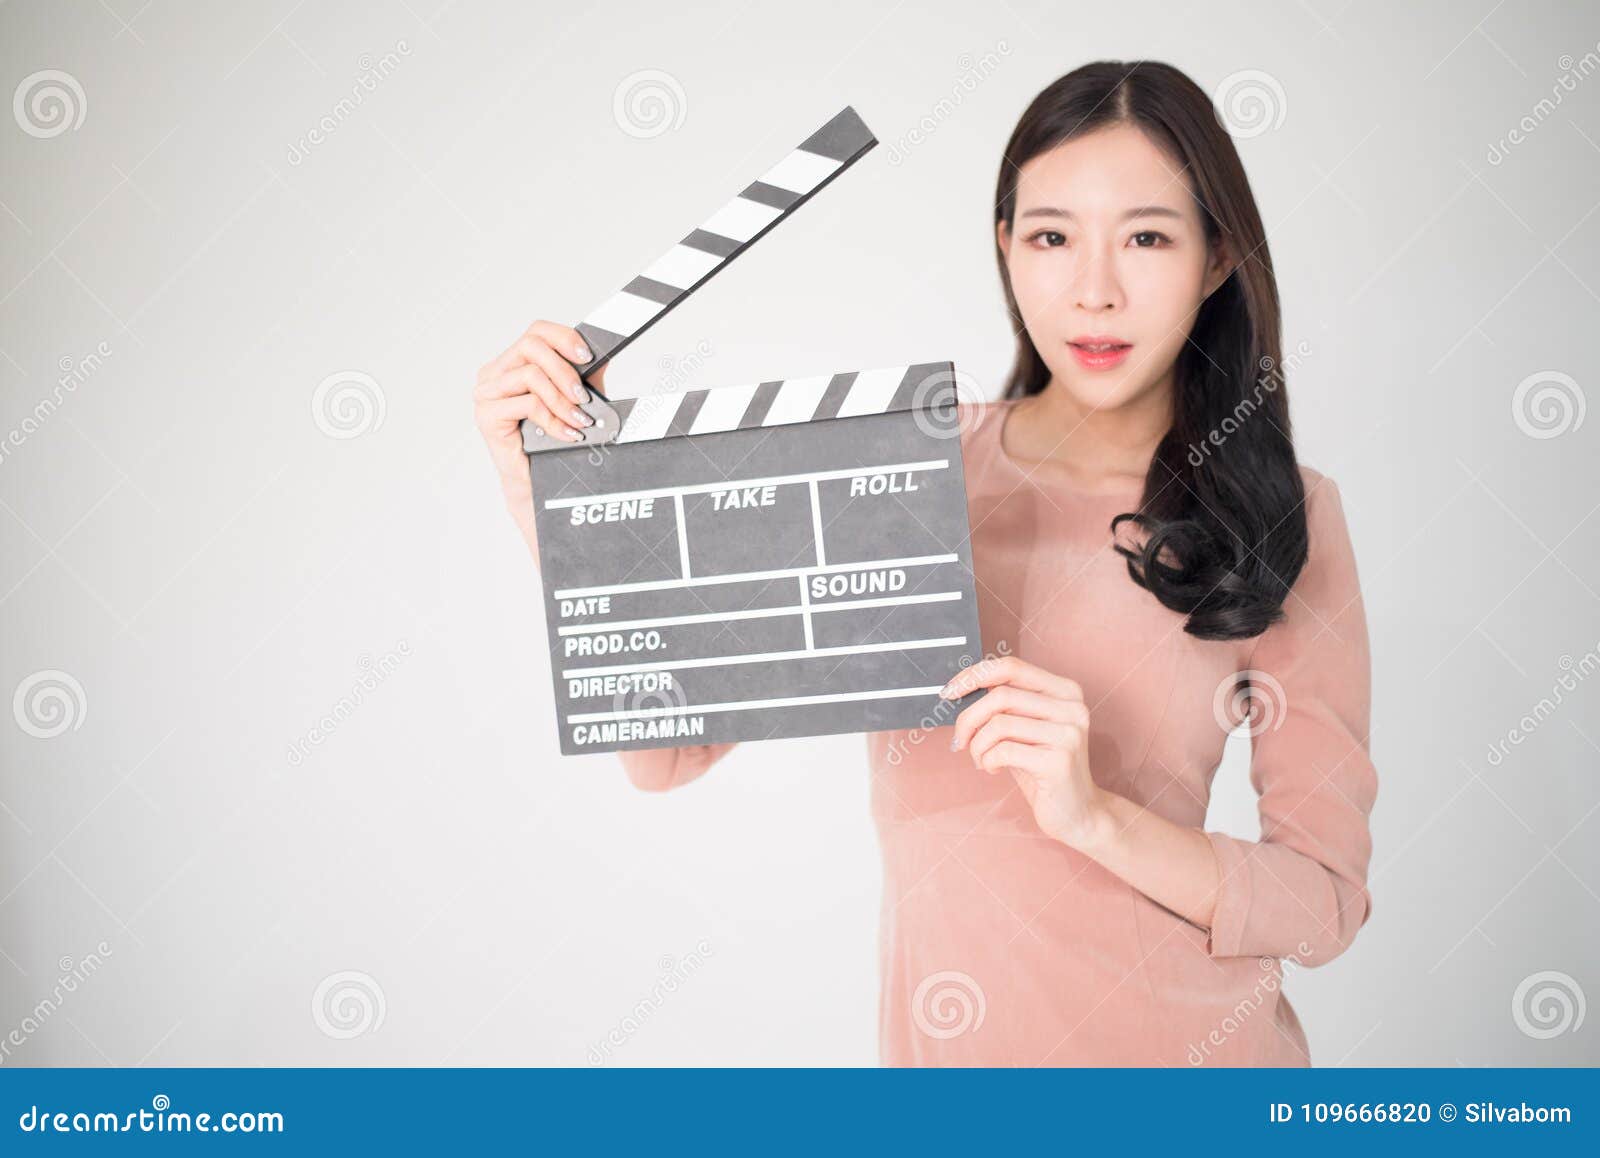 sian woman holding movie clapper board  on white background. cinematography, communication arts, casting, audition, movie